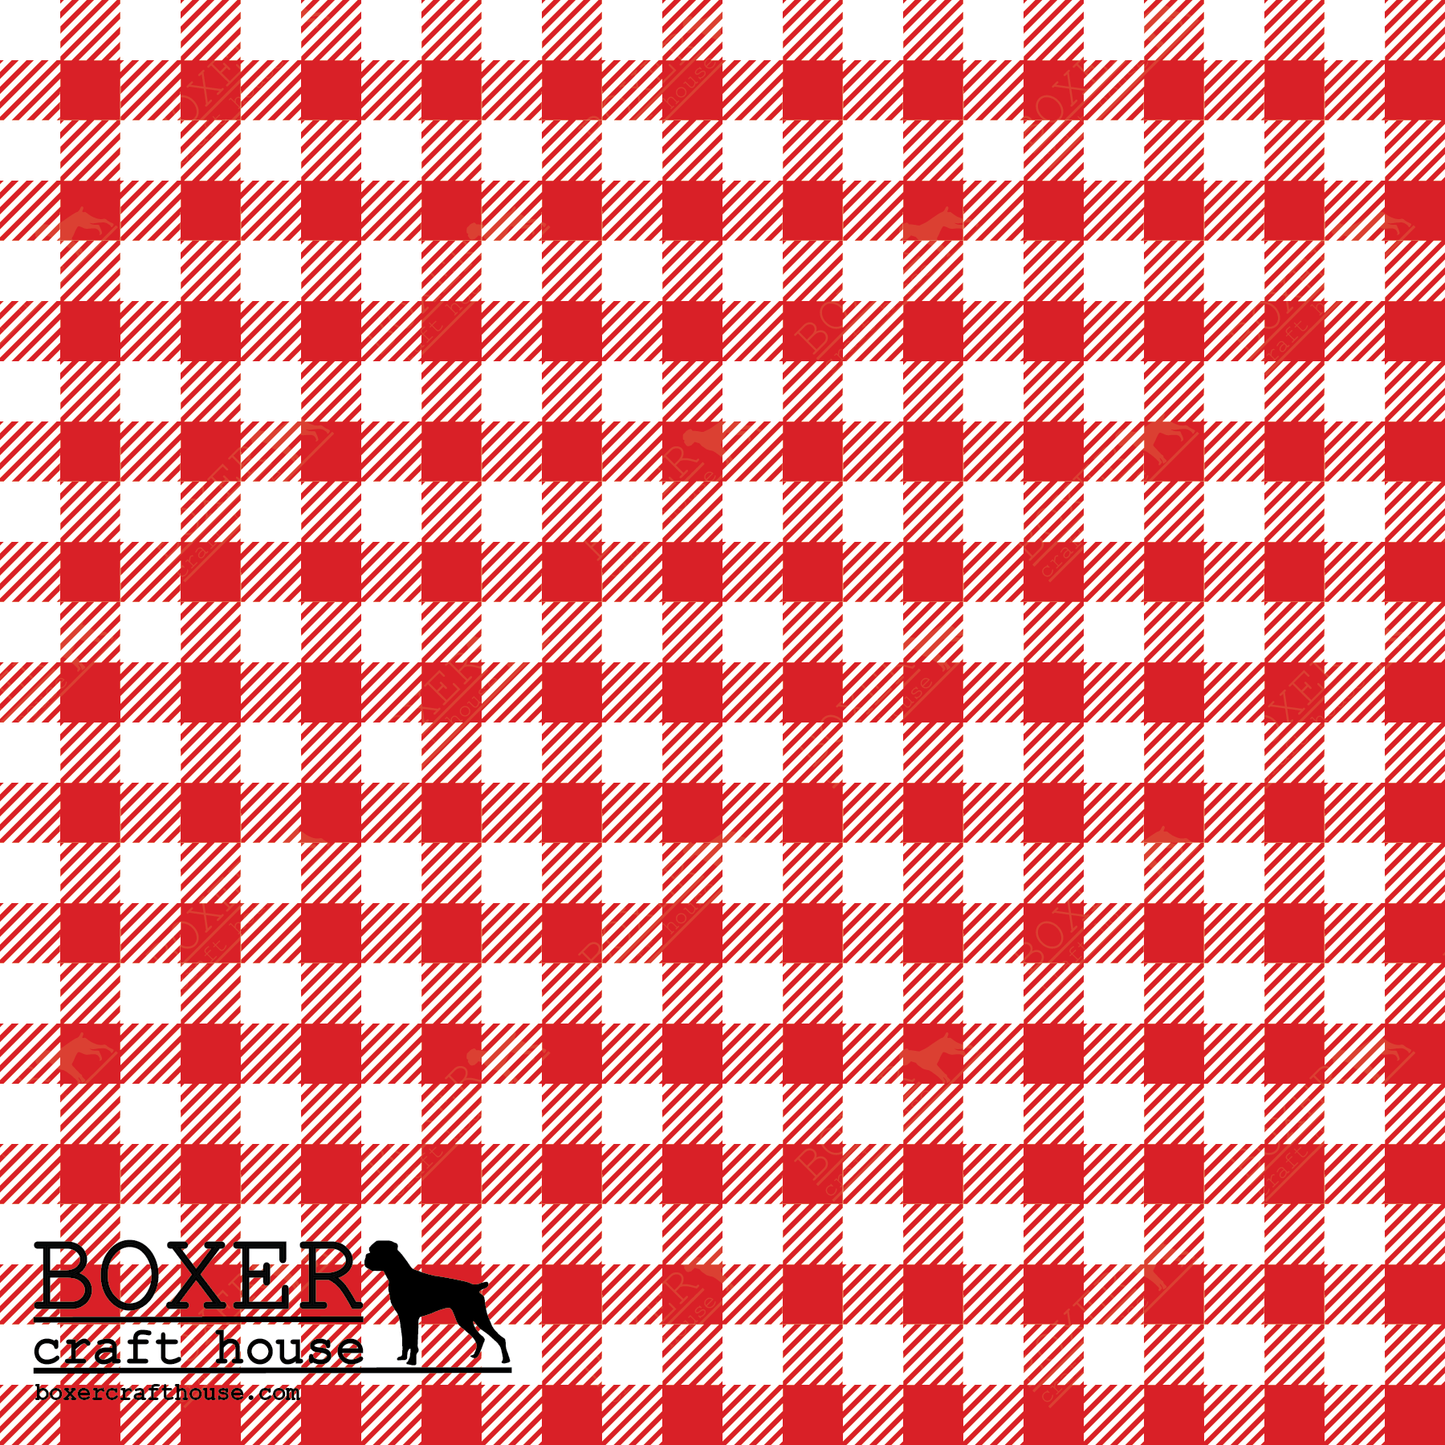 Gingham 1/4" - Fiery Red